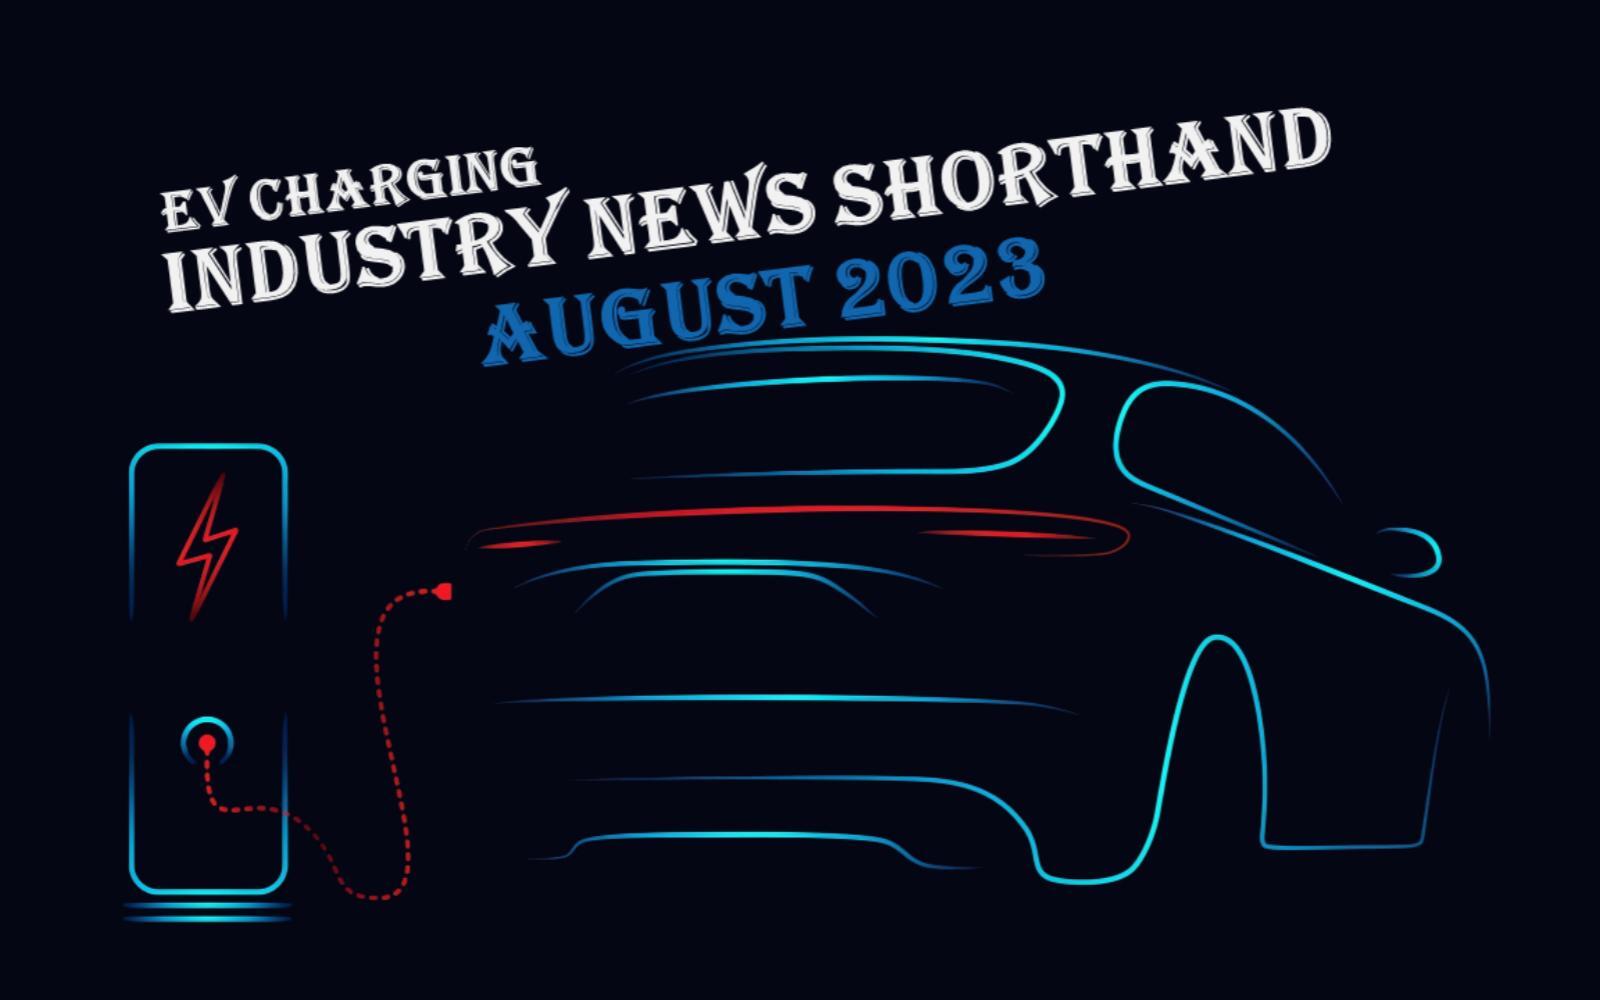 August 2023 EV charging industry news summary